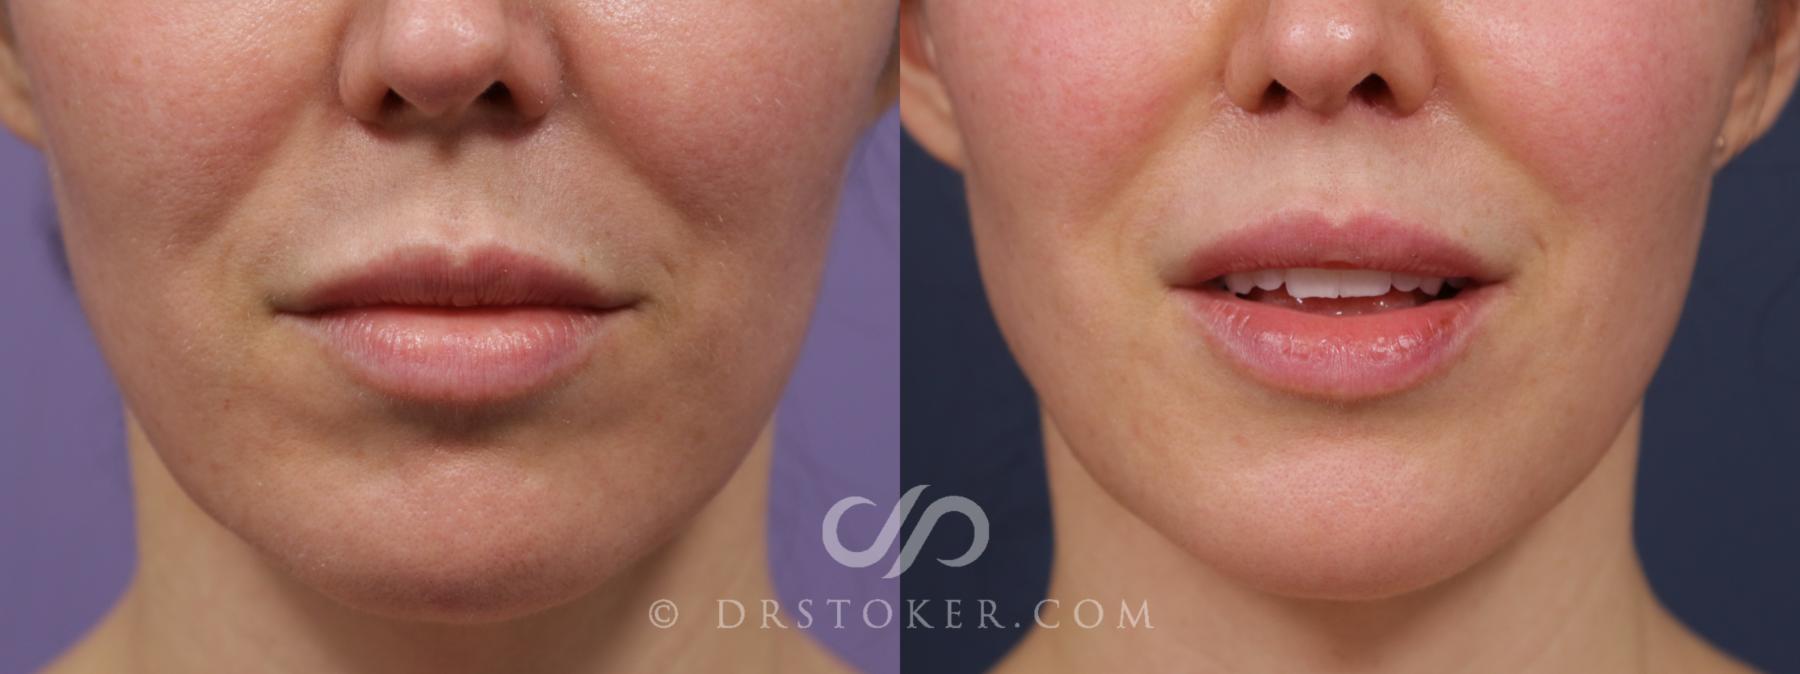 Before & After Lip Lift Case 1997 Front View in Los Angeles, CA